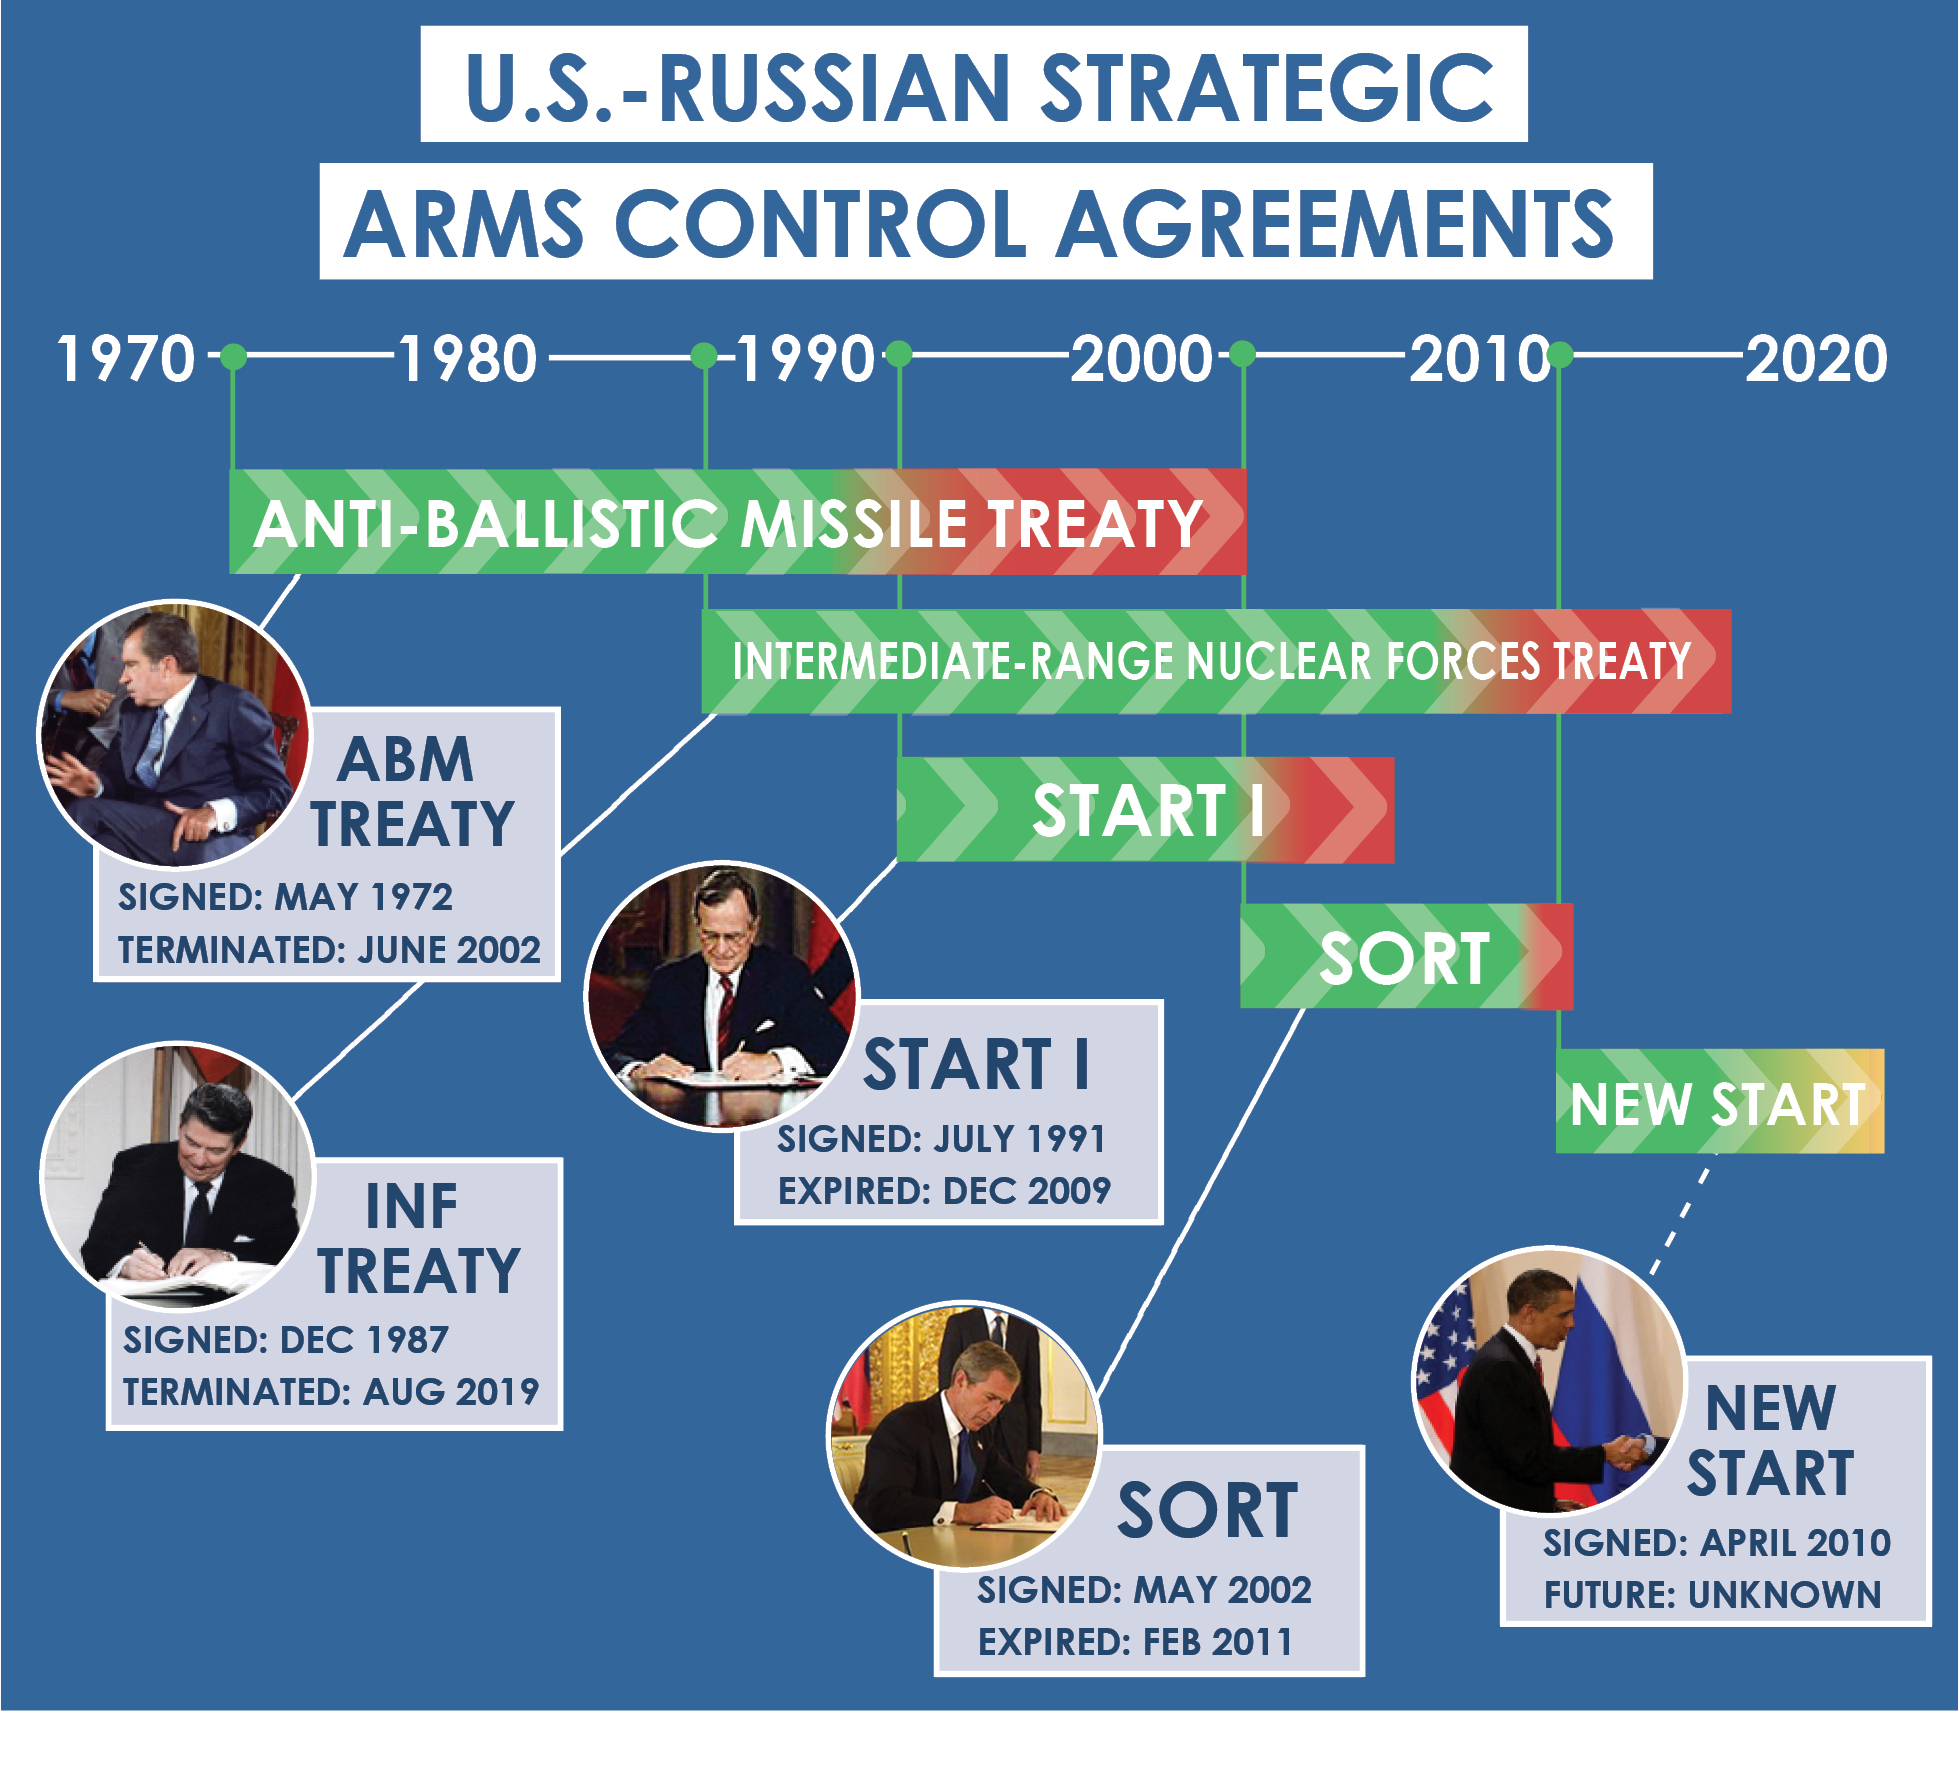 U.S.-Russian Strategic Arms Control Agreements - Center for Arms Control and Non-Proliferation